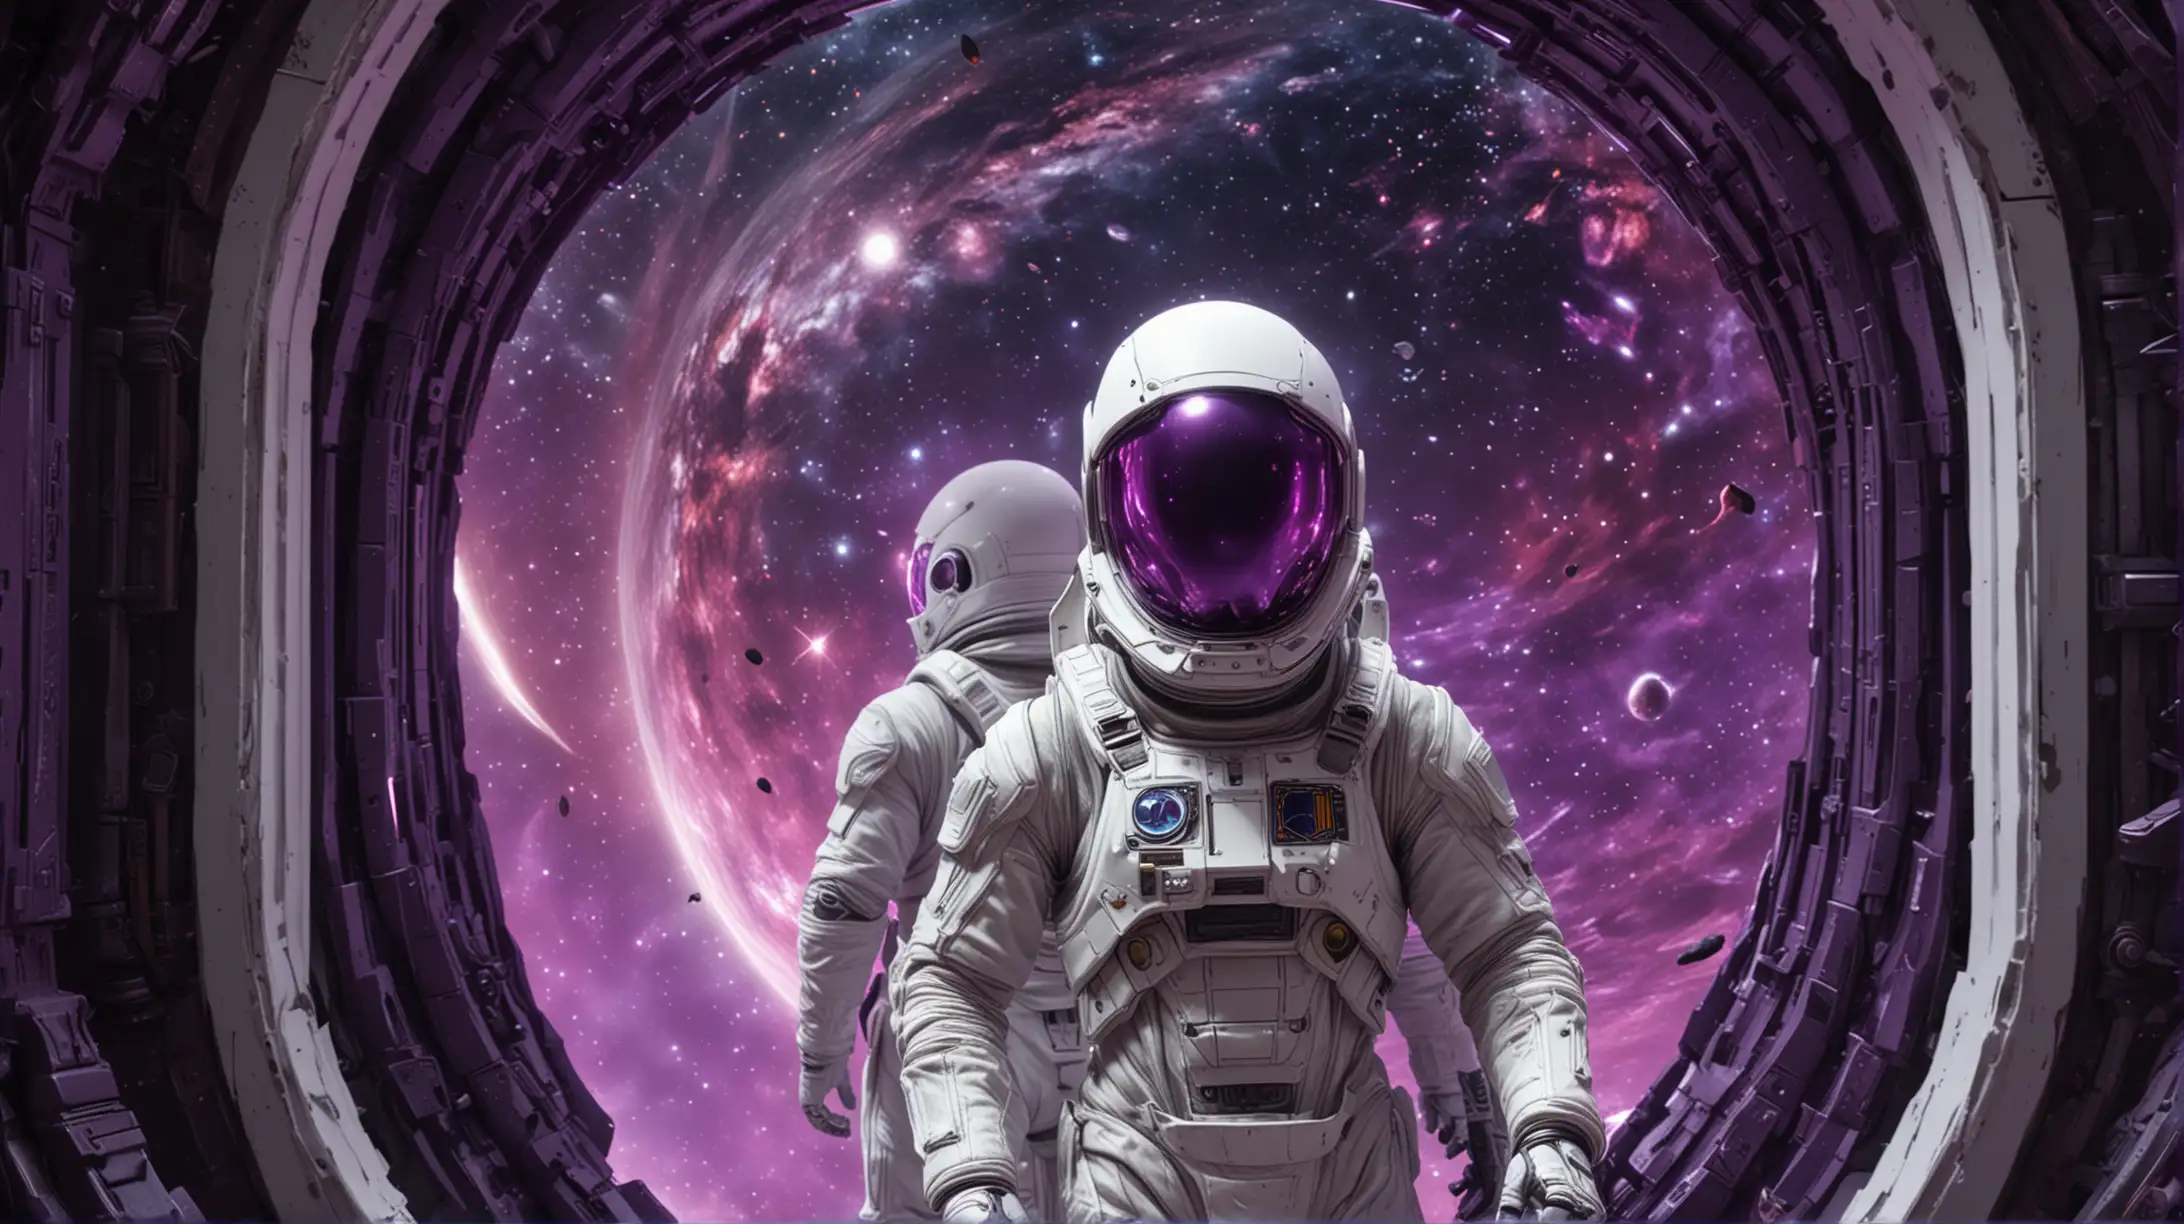 Hyperrealistic CloseUp Space Soldiers Exiting Purple Portal on Alien Planet